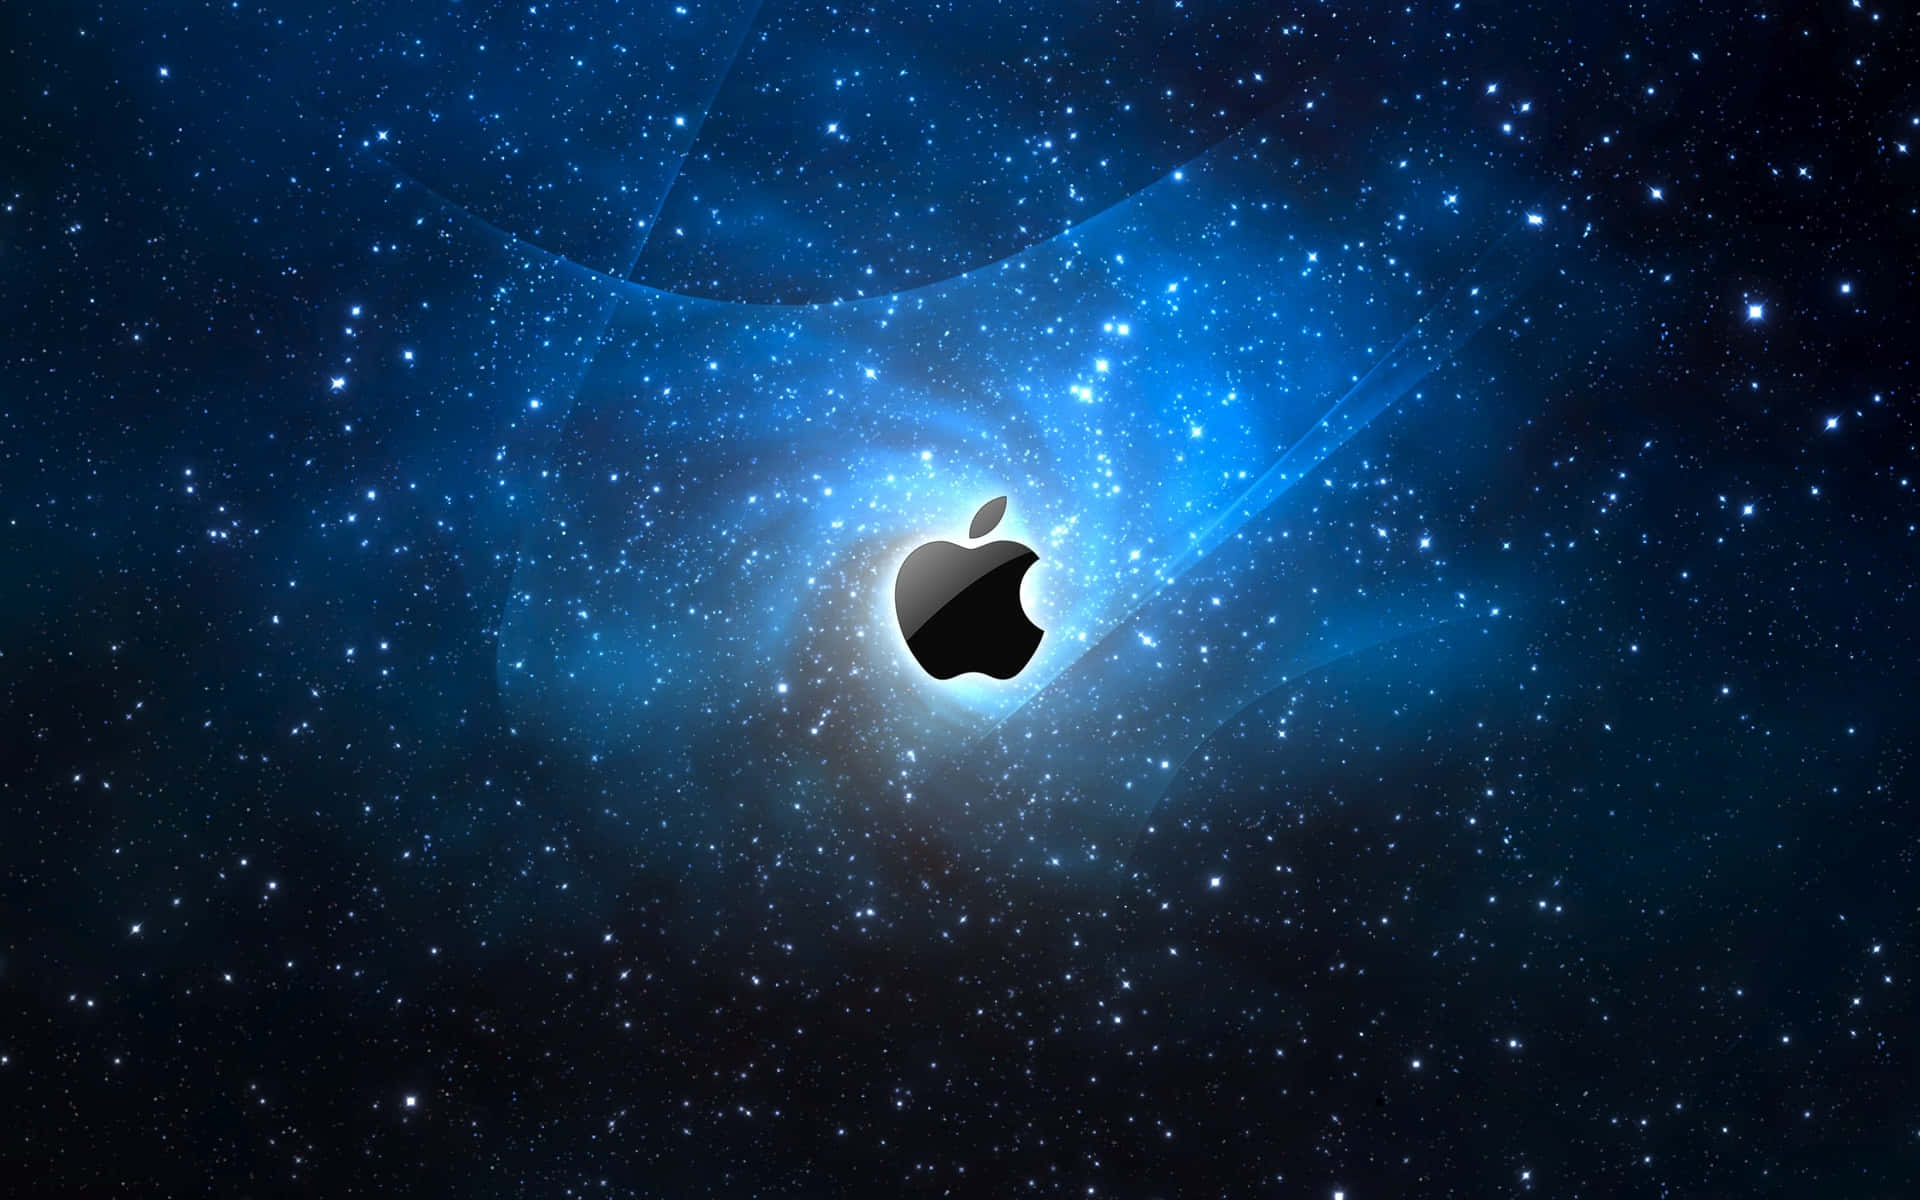 Apple Logo In The Space With Stars Wallpaper